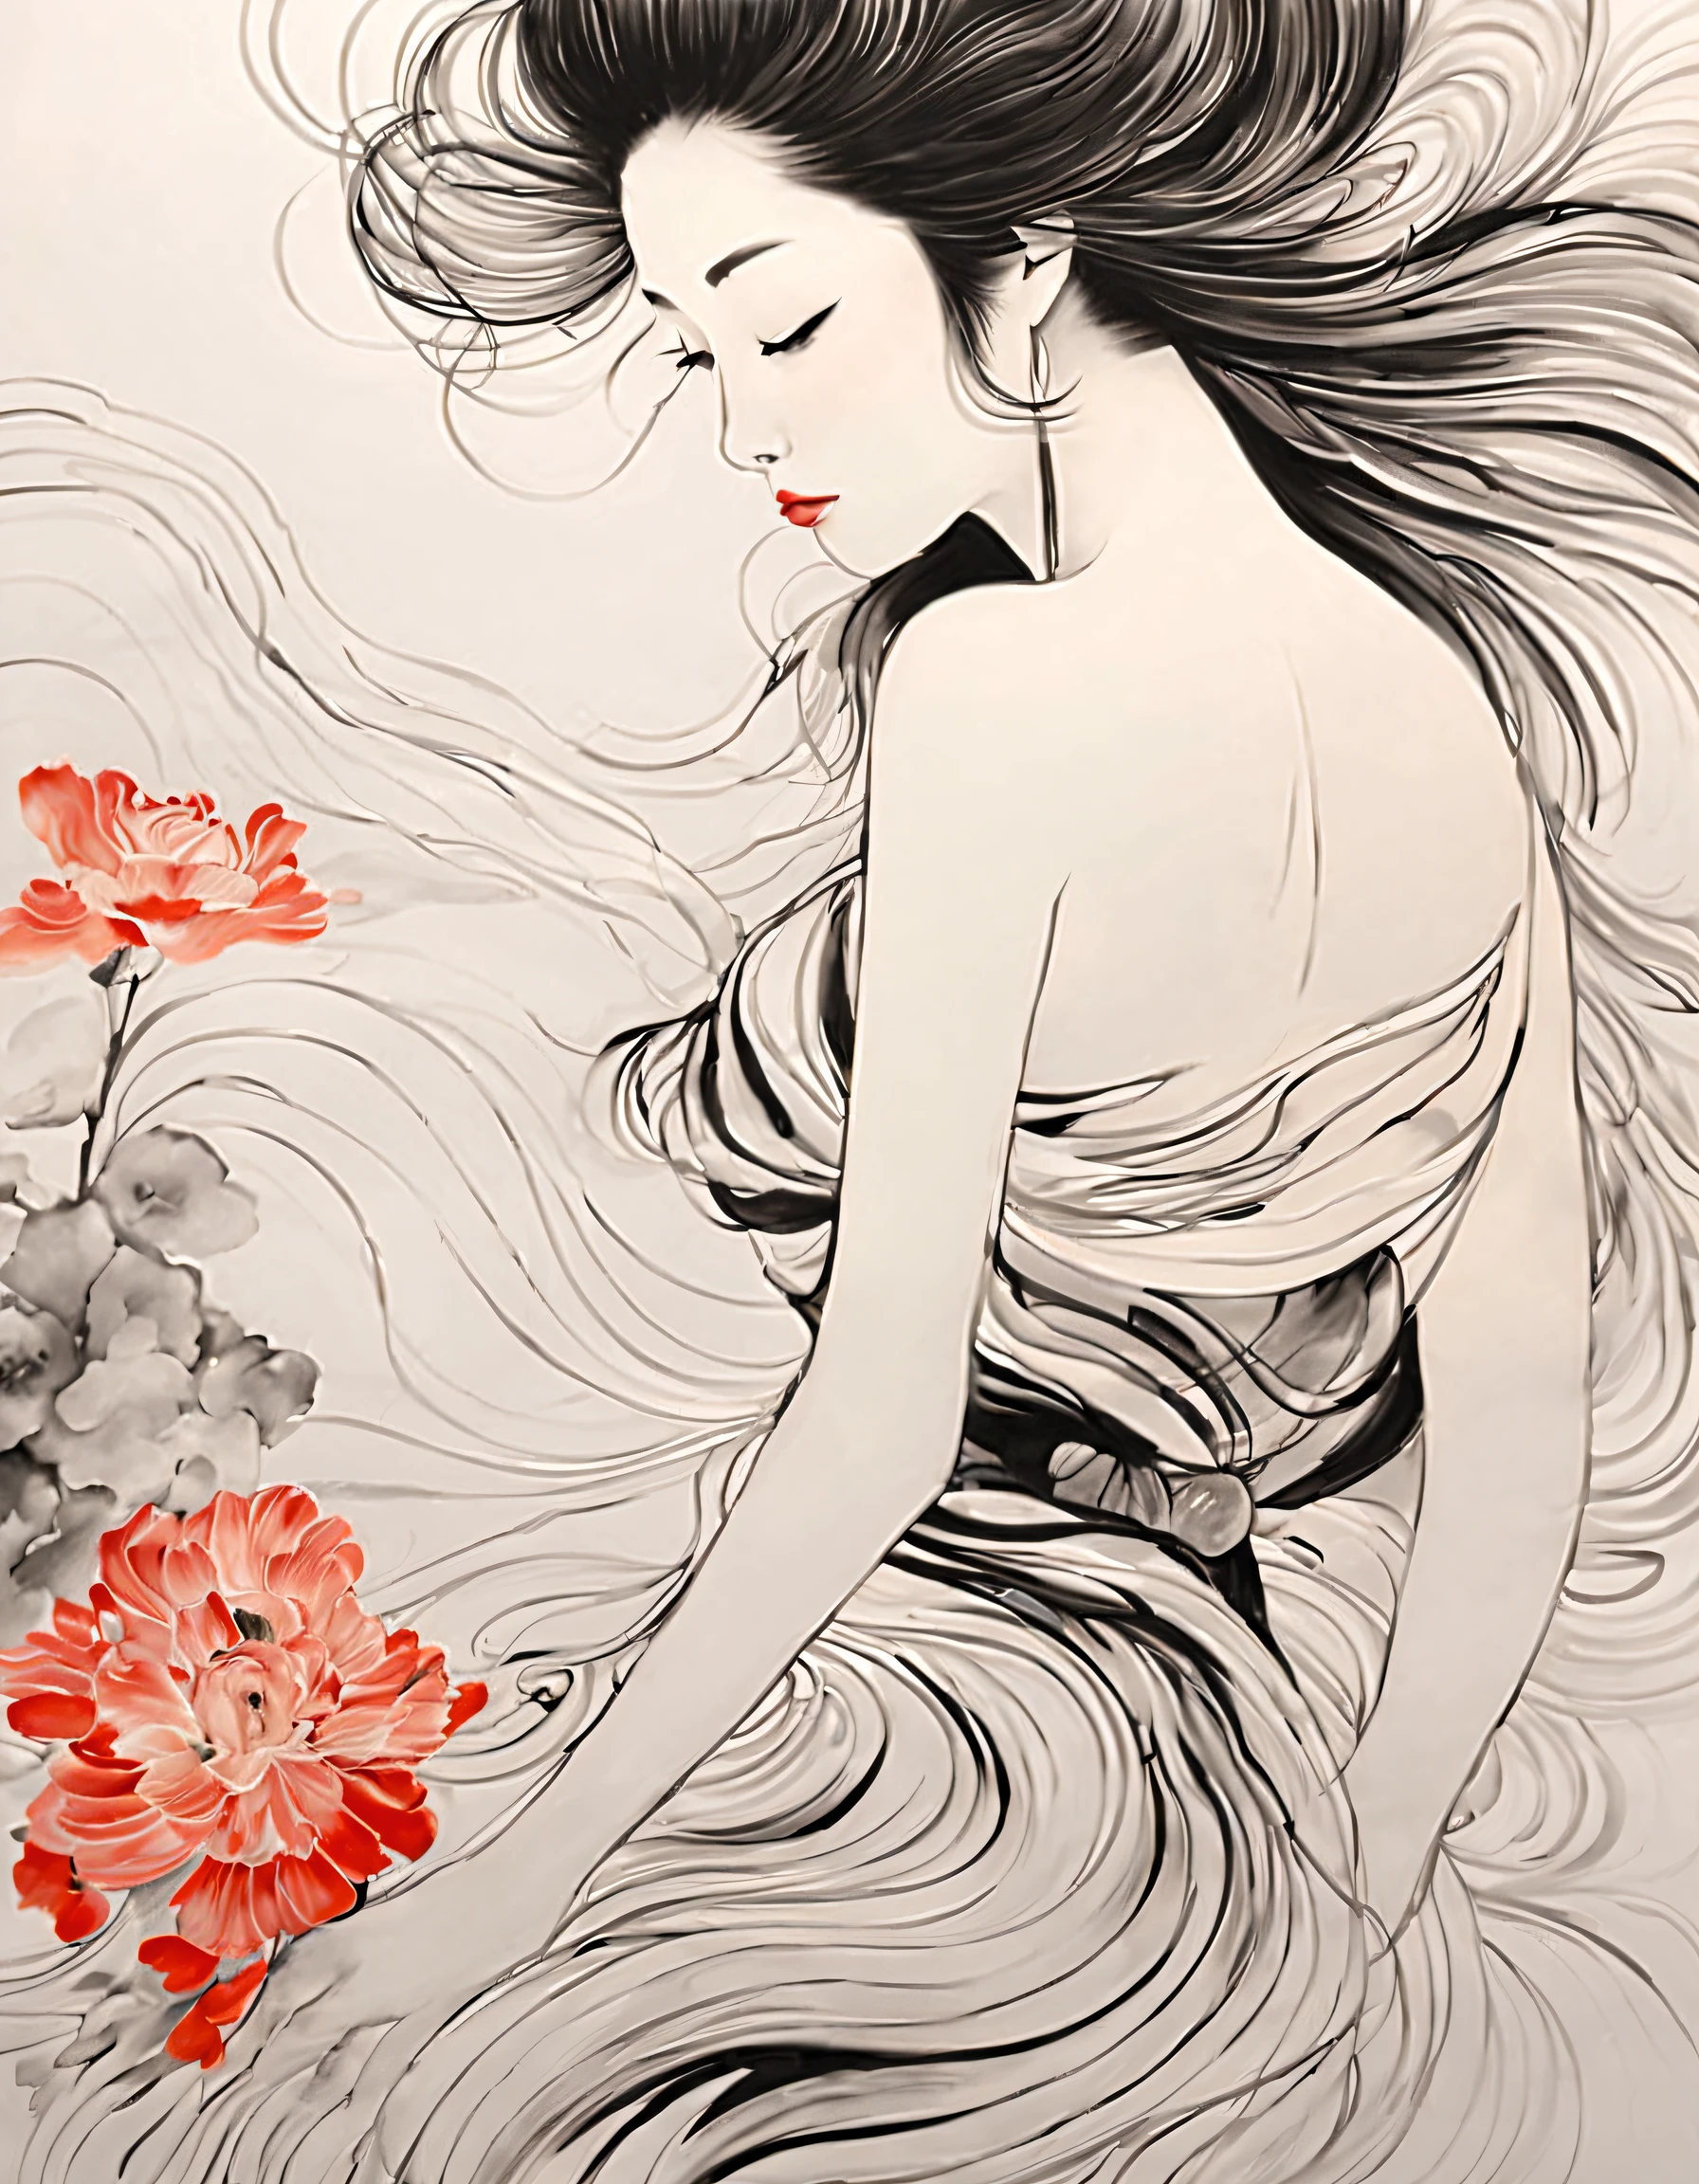 Chinese traditional ink body art style, (Use simple lines to outline a woman’s graceful figure），on  back, undulating lines, Thick and thin lines, (body art）,
line art, Black and white painting,character drawing,line art,lyrical abstraction, Fountain Pen Art,Gel Pen,crayon art,